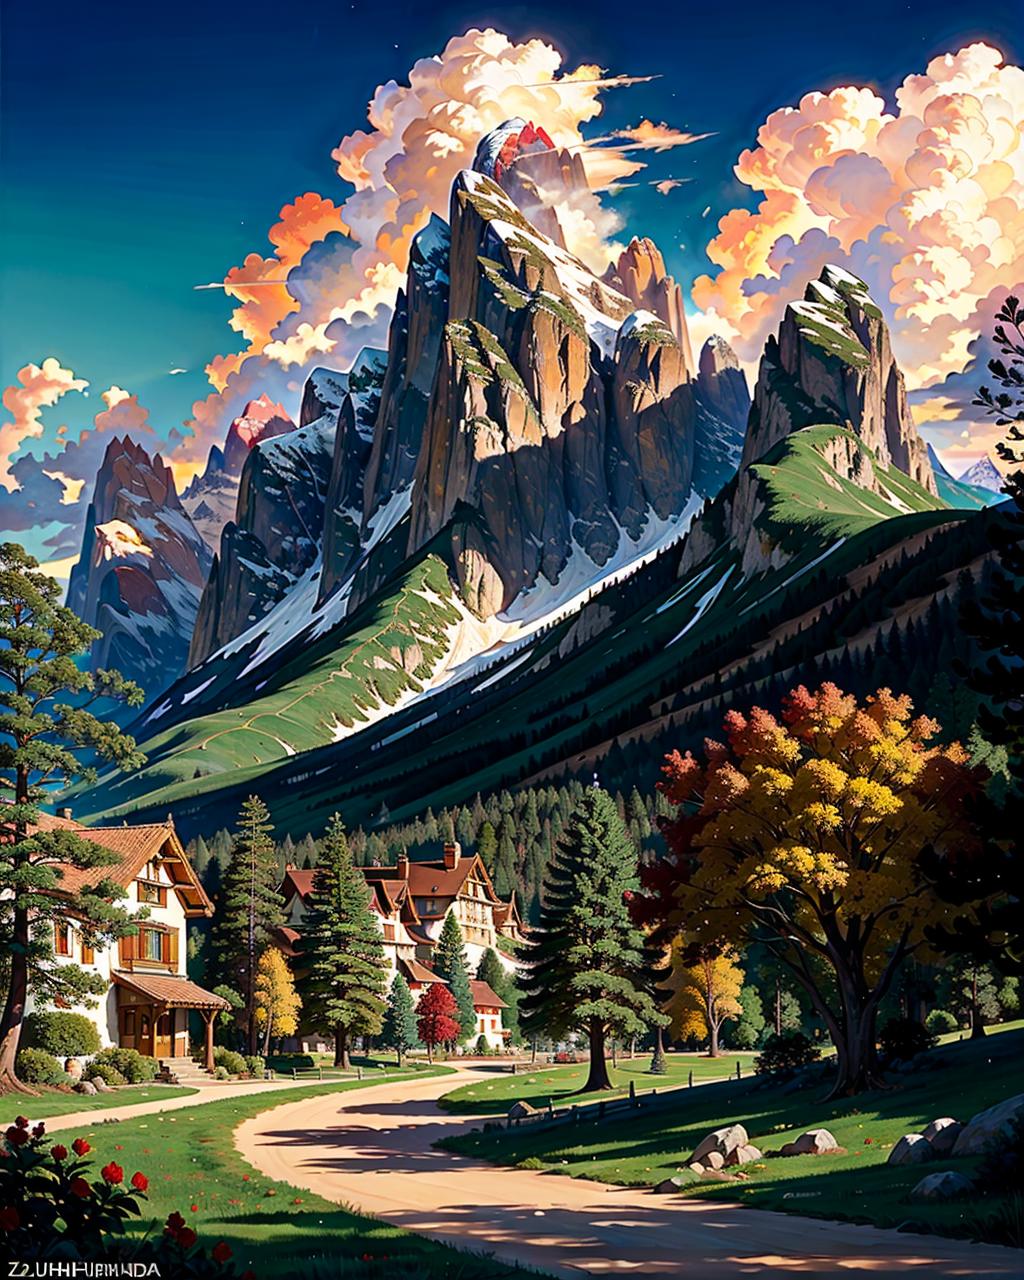 A Painting of a Village Beneath Snow-Covered Mountains